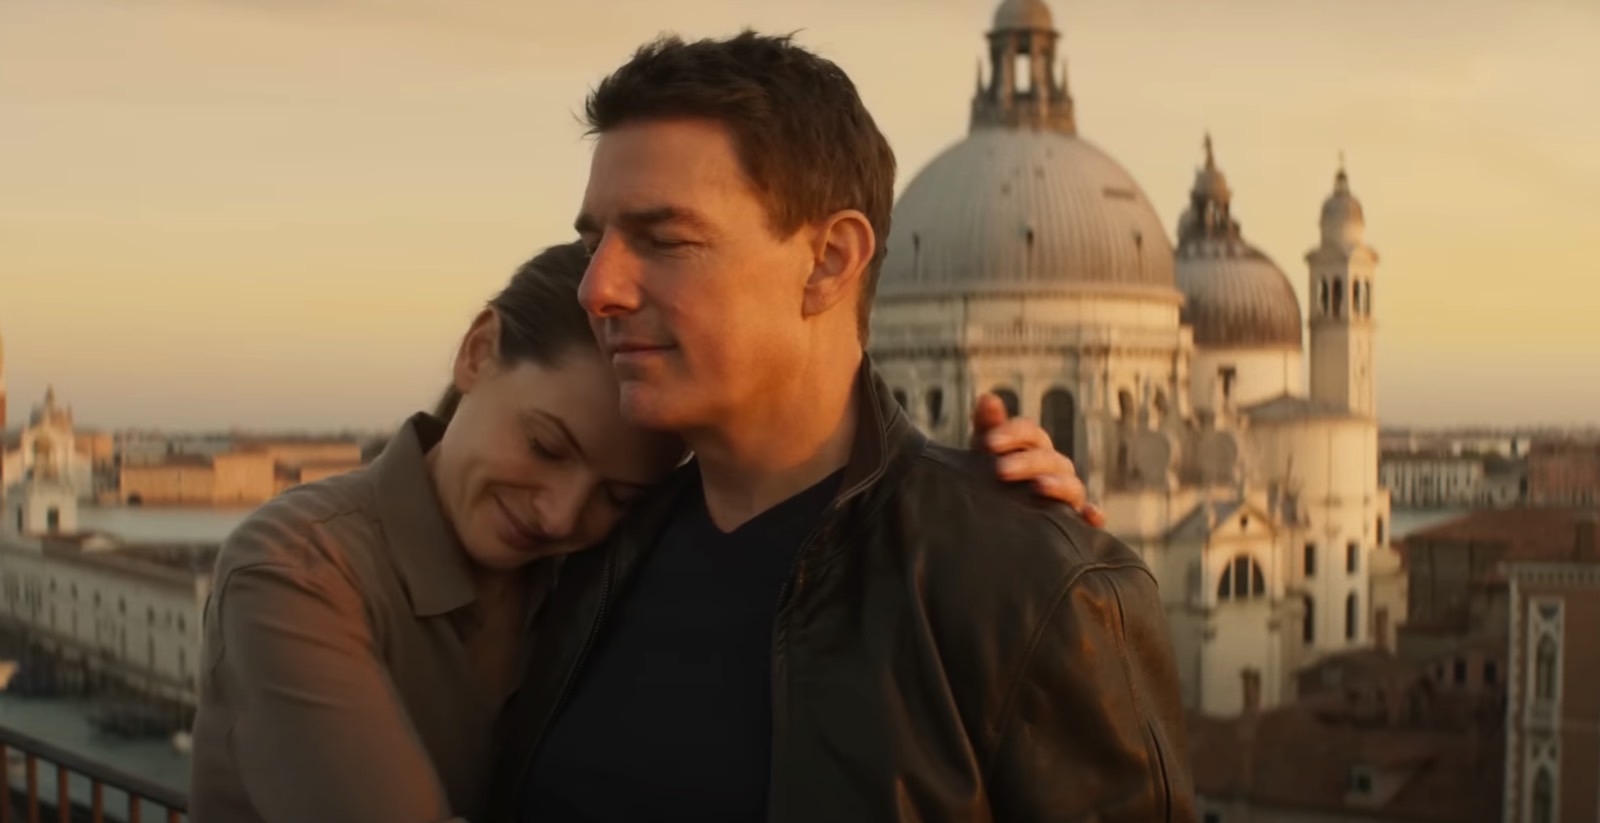 Ilsa Faust (Rebecca Ferguson) and Ethan Hunt (Tom Cruise) in Mission: Impossible - Dead Reckoning Part One trailer.